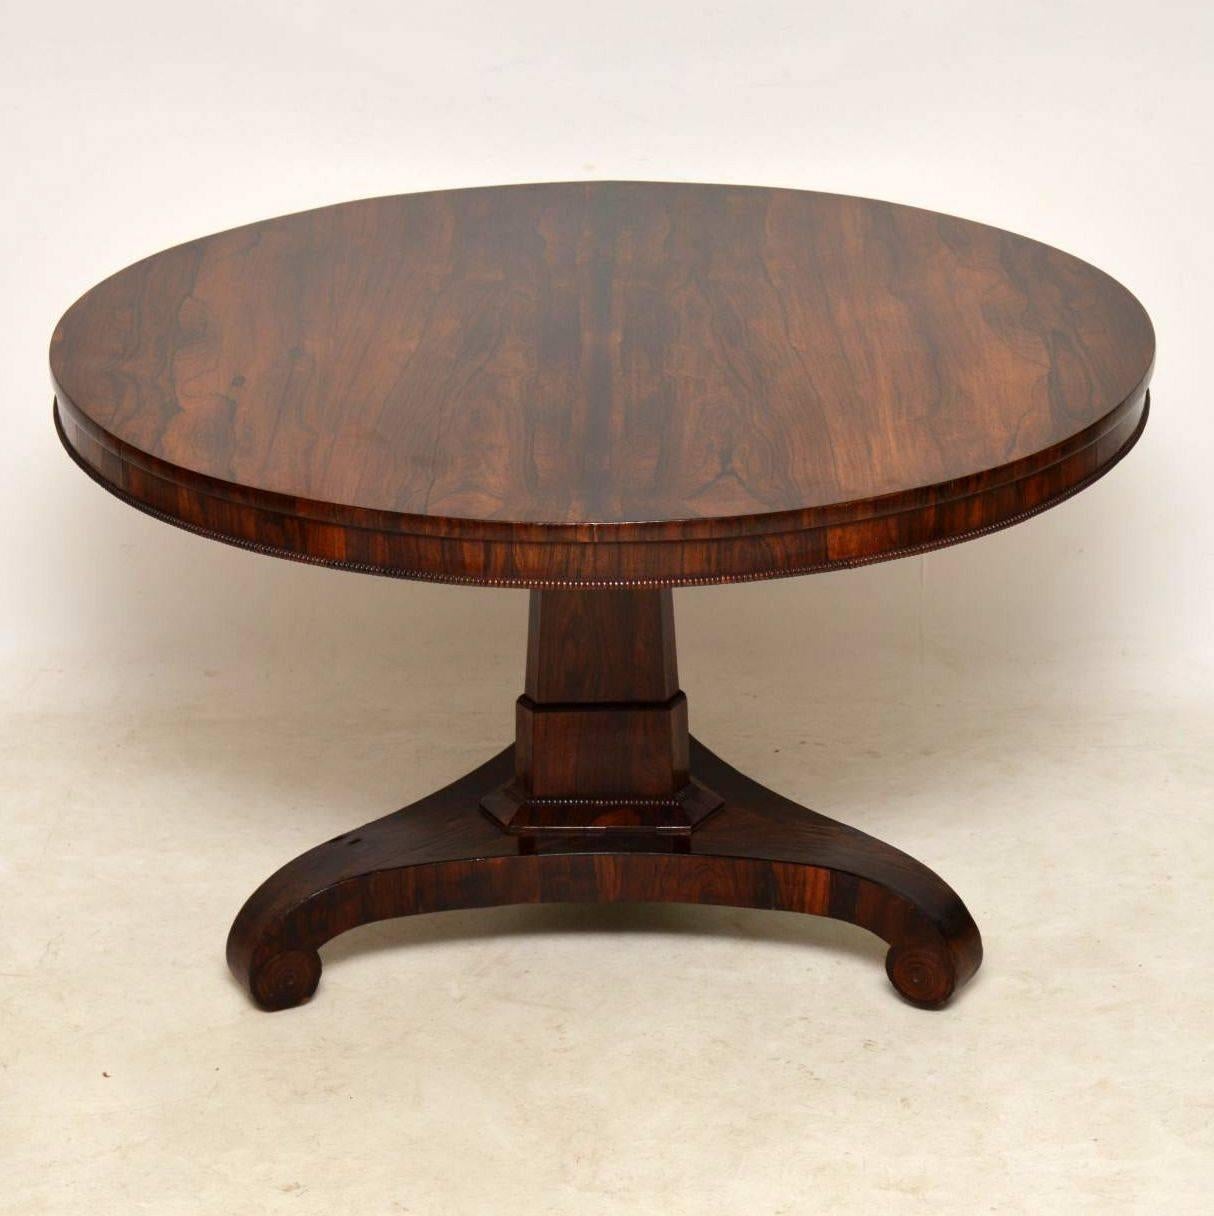 Antique rosewood circular dining or centre table in very good condition and dating from the William IV 1830-40 period. The top can be taken off or flipped up on the base. The rosewood grain, especially on the top is very well patterned. The top has